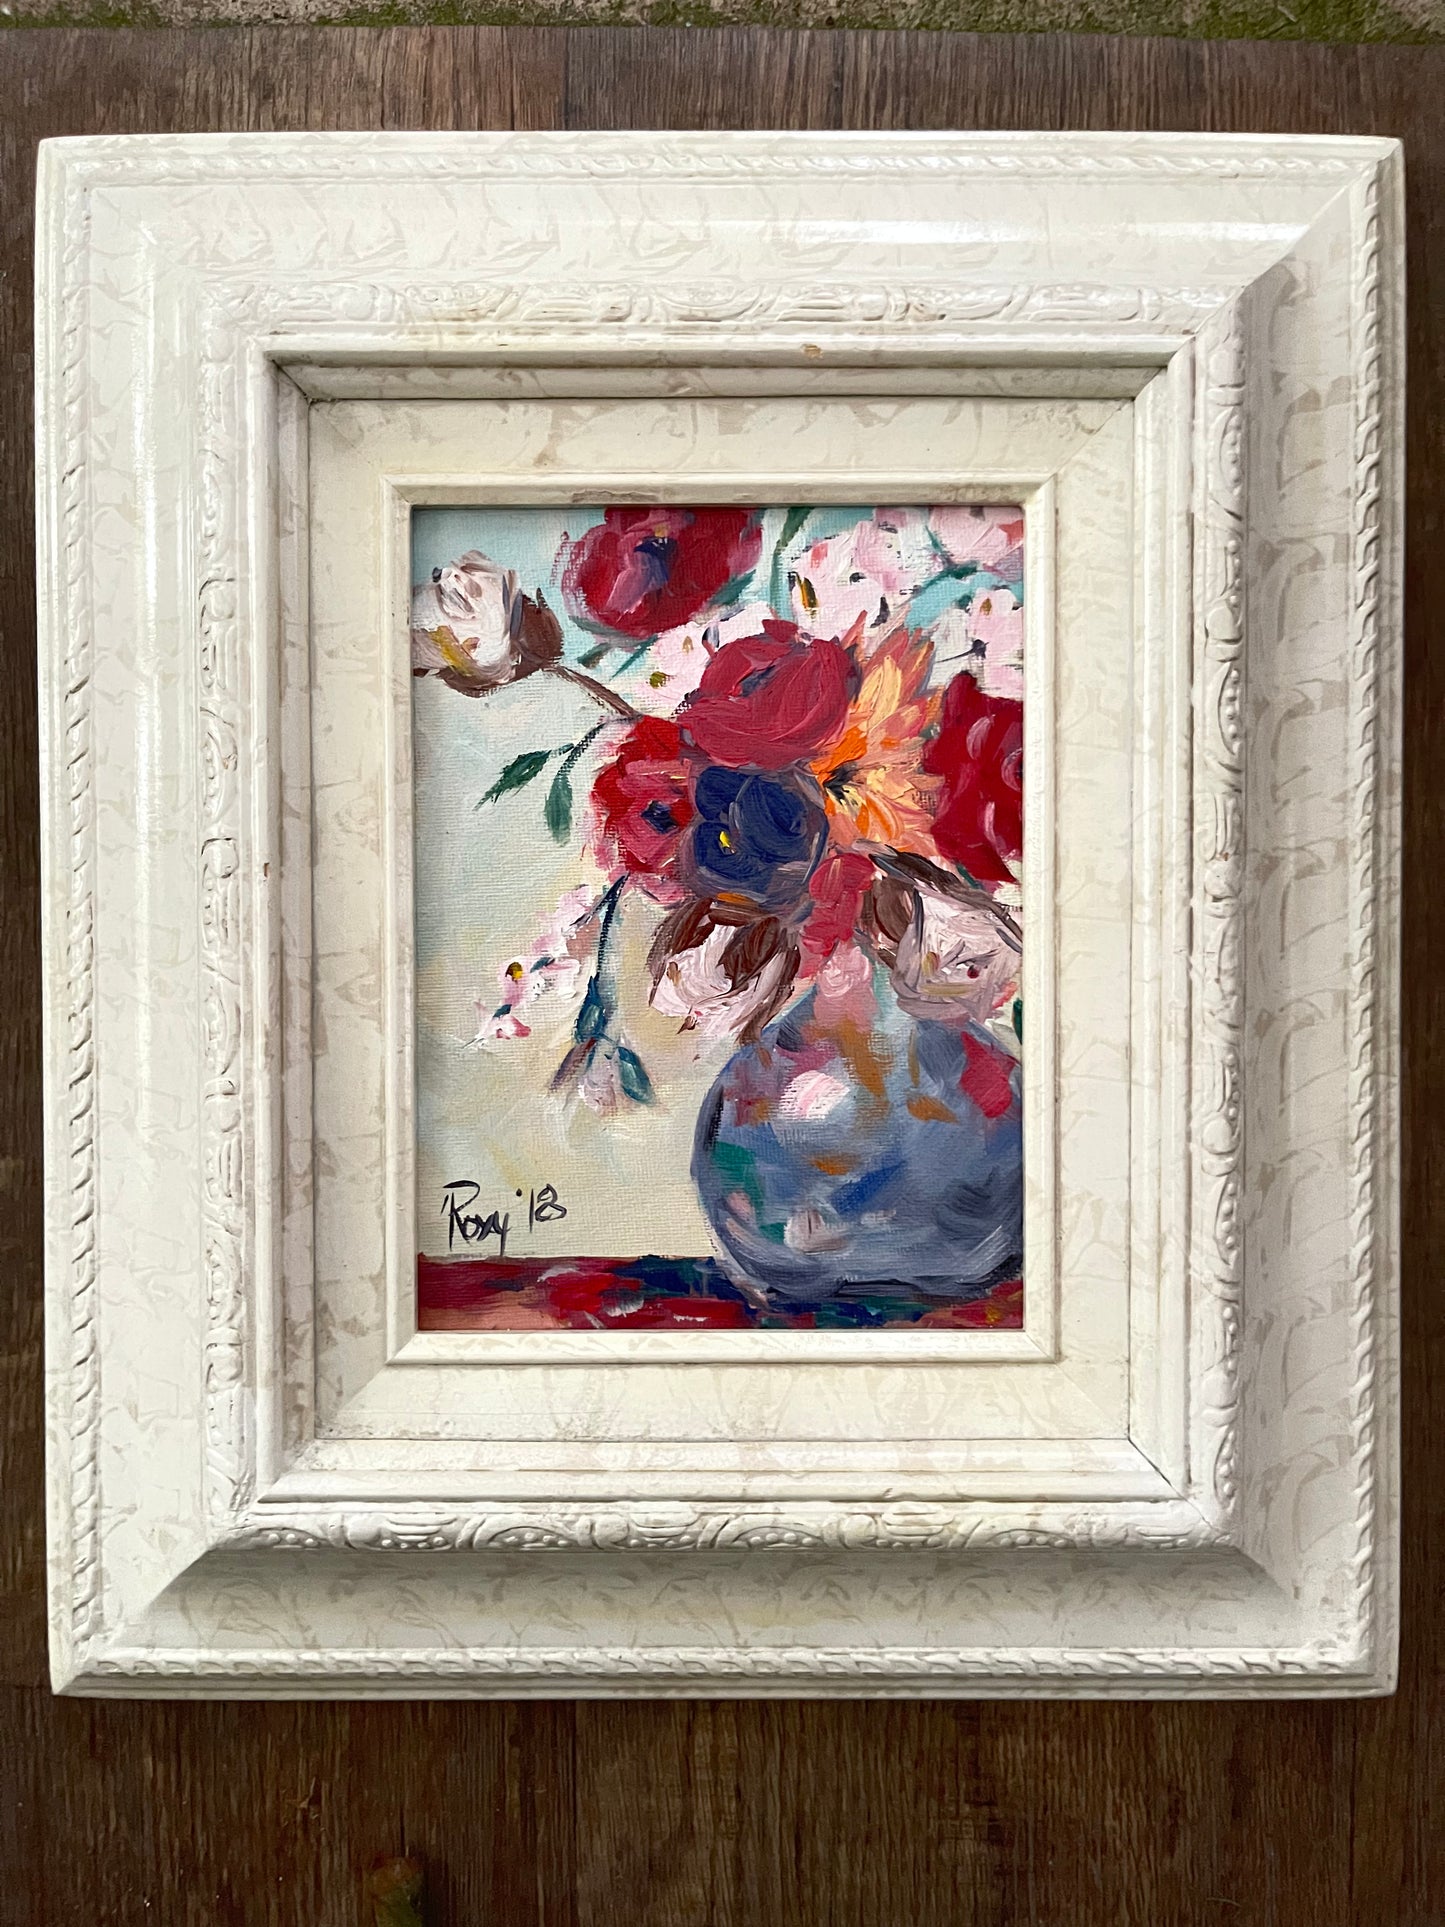 Cotton and Roses-Original Oil Painting Framed